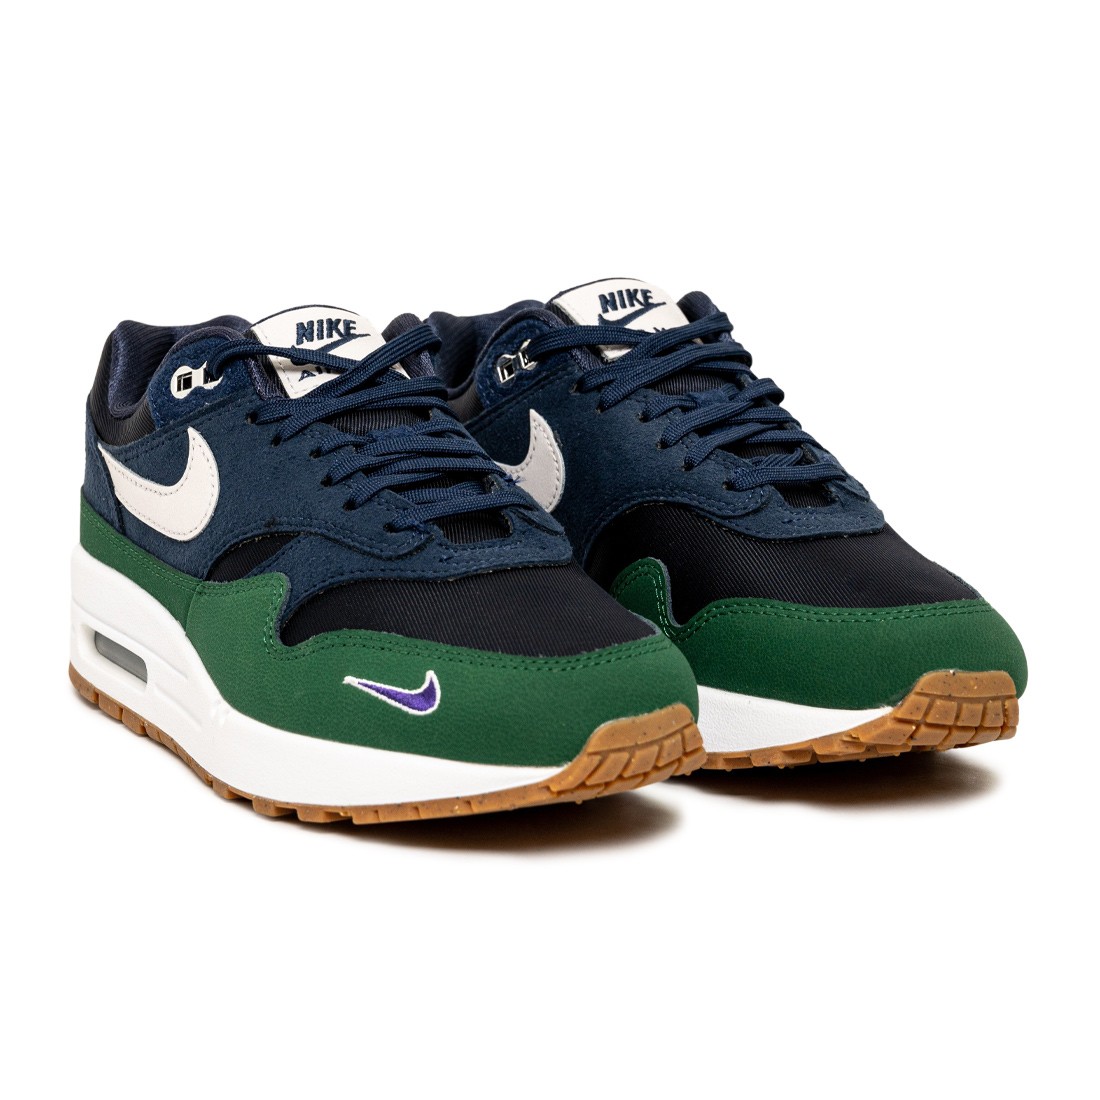 The Air Max 1 LV8 pack is straight 🔥 - what's your favourite colour -  Obsidian, Dark Teal Green or Martian Sunrise??? : r/airmax